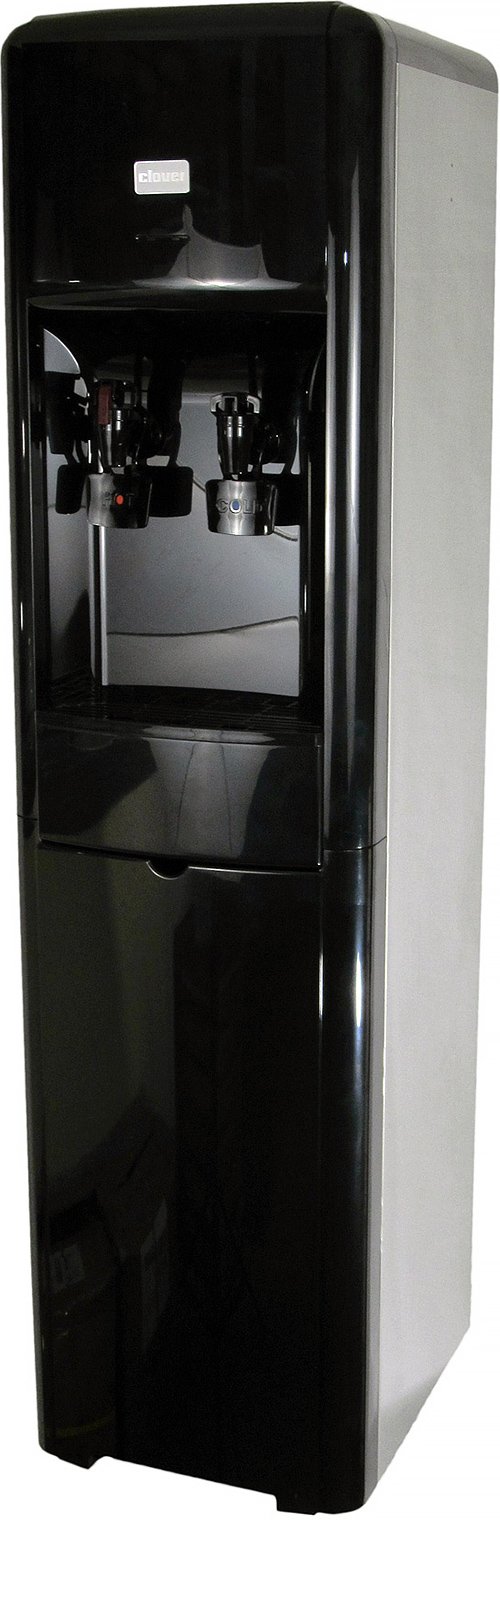 Clover D16A-B Water Dispenser -Hot and Cold Bottleless, High Capacity Dispenser with Installation Kit and Inline Filter